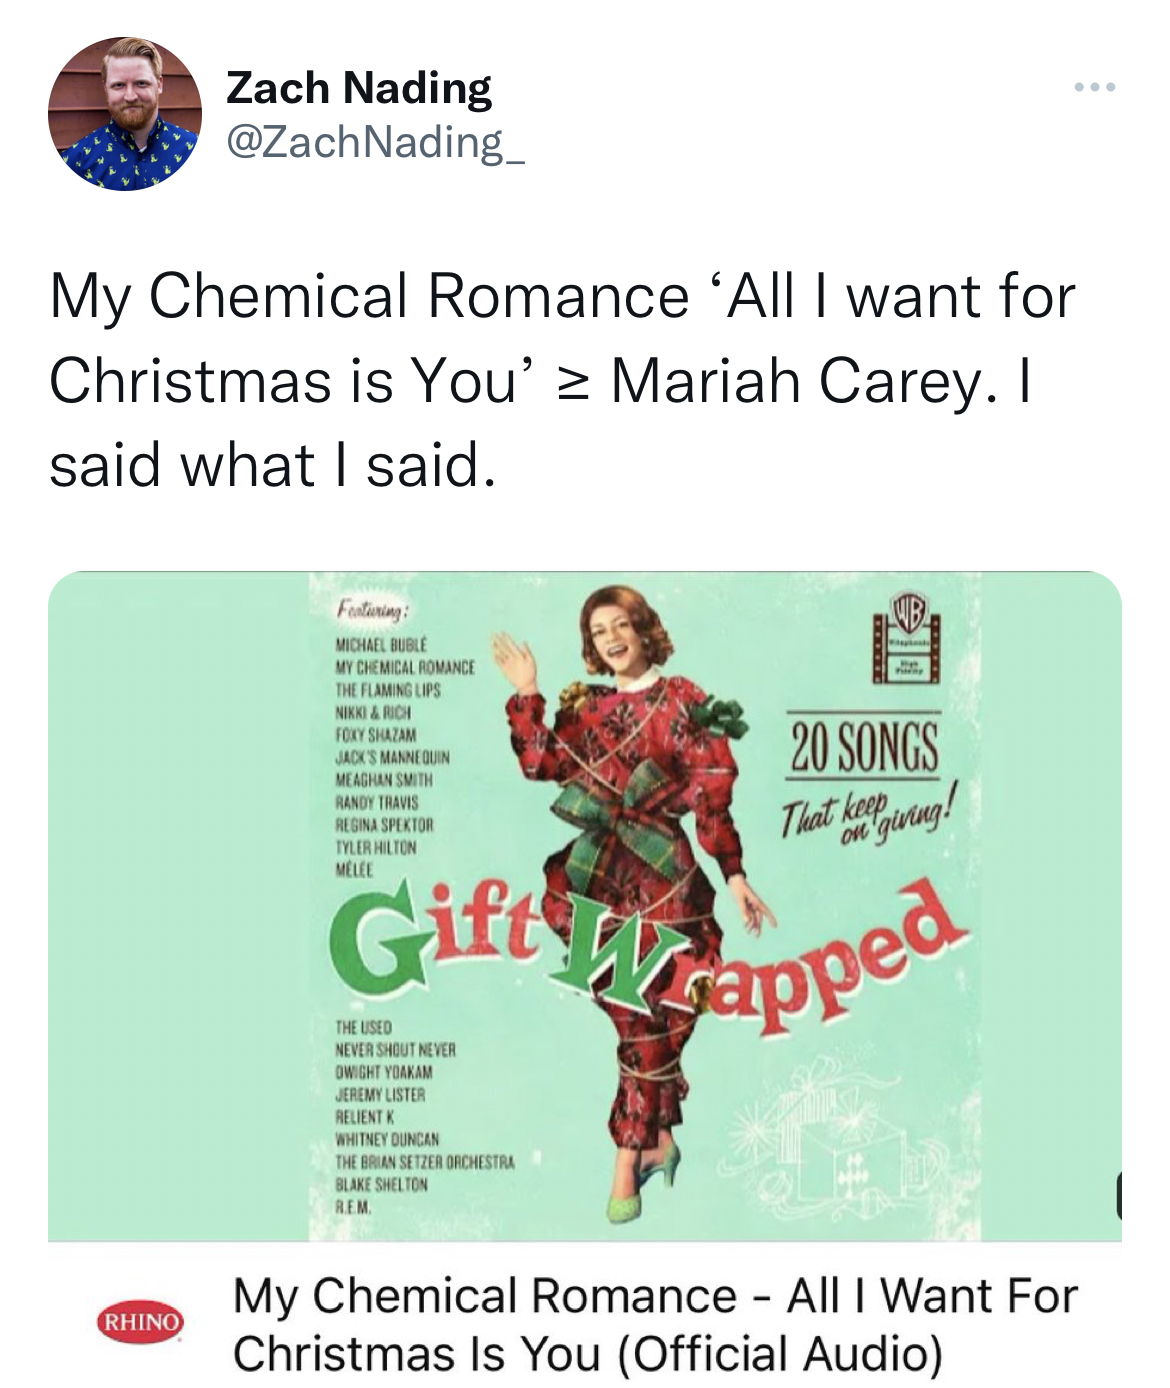 Tweets dunking on celebs - gift wrapped 20 songs that keep on giving album songs - Zach Nading My Chemical Romance 'All I want for Christmas is You' Mariah Carey. I said what I said. Rhino Folini Molle My Chemical N Flaming Lips Exy Sm J Media Nav Heona S